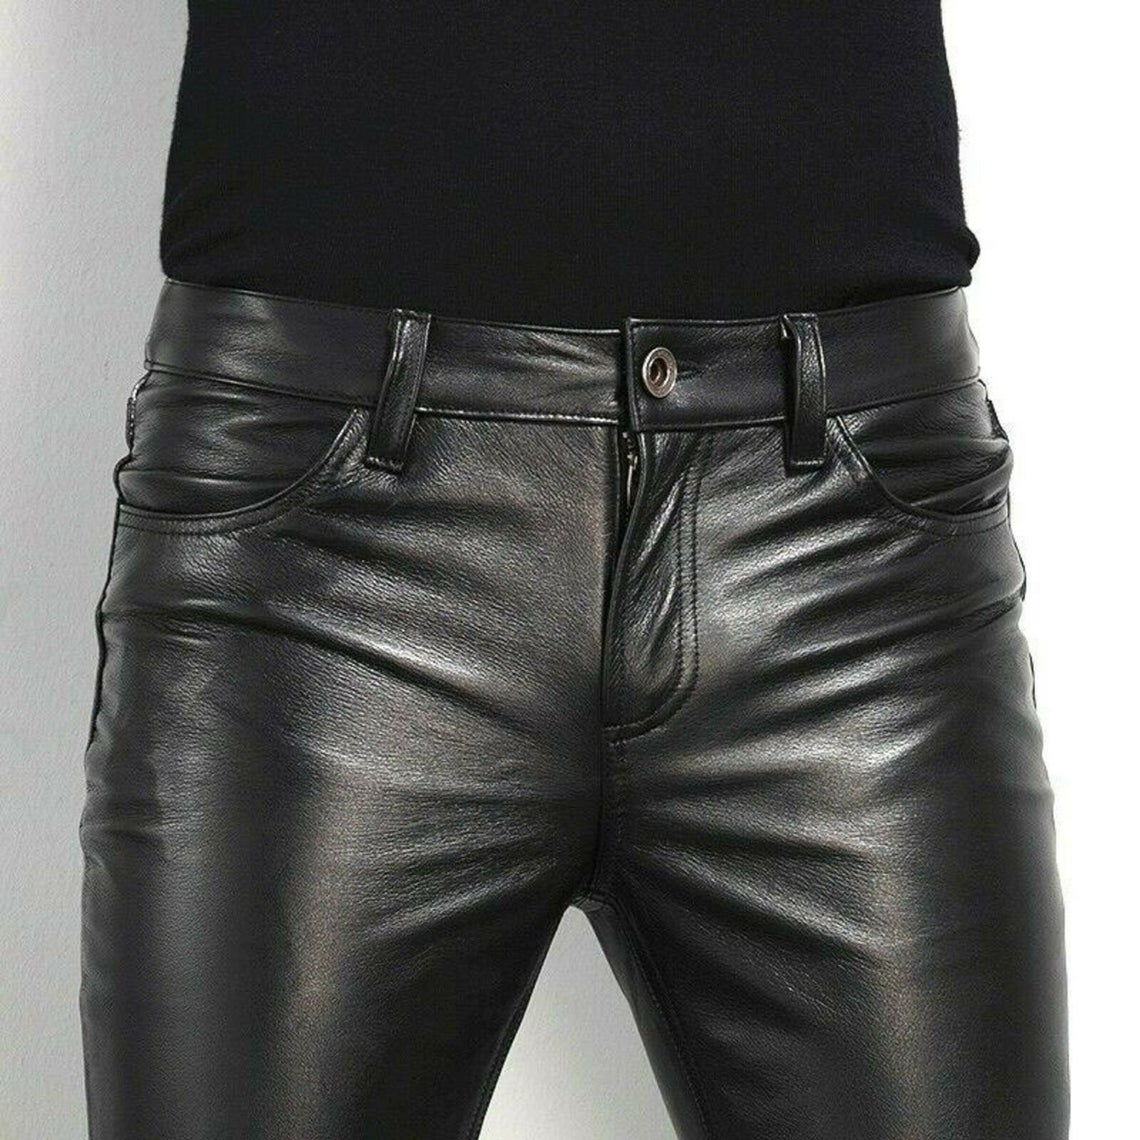 Men's Leather Trousers Long Tight Motorcycle Trousers with Pockets Belt  Hole Zip Patch Casual Leather Trousers Punk Hipop Look Style Bomber Trousers  Sports Trousers Suitable for Men Everyday Wear : Amazon.co.uk: Fashion